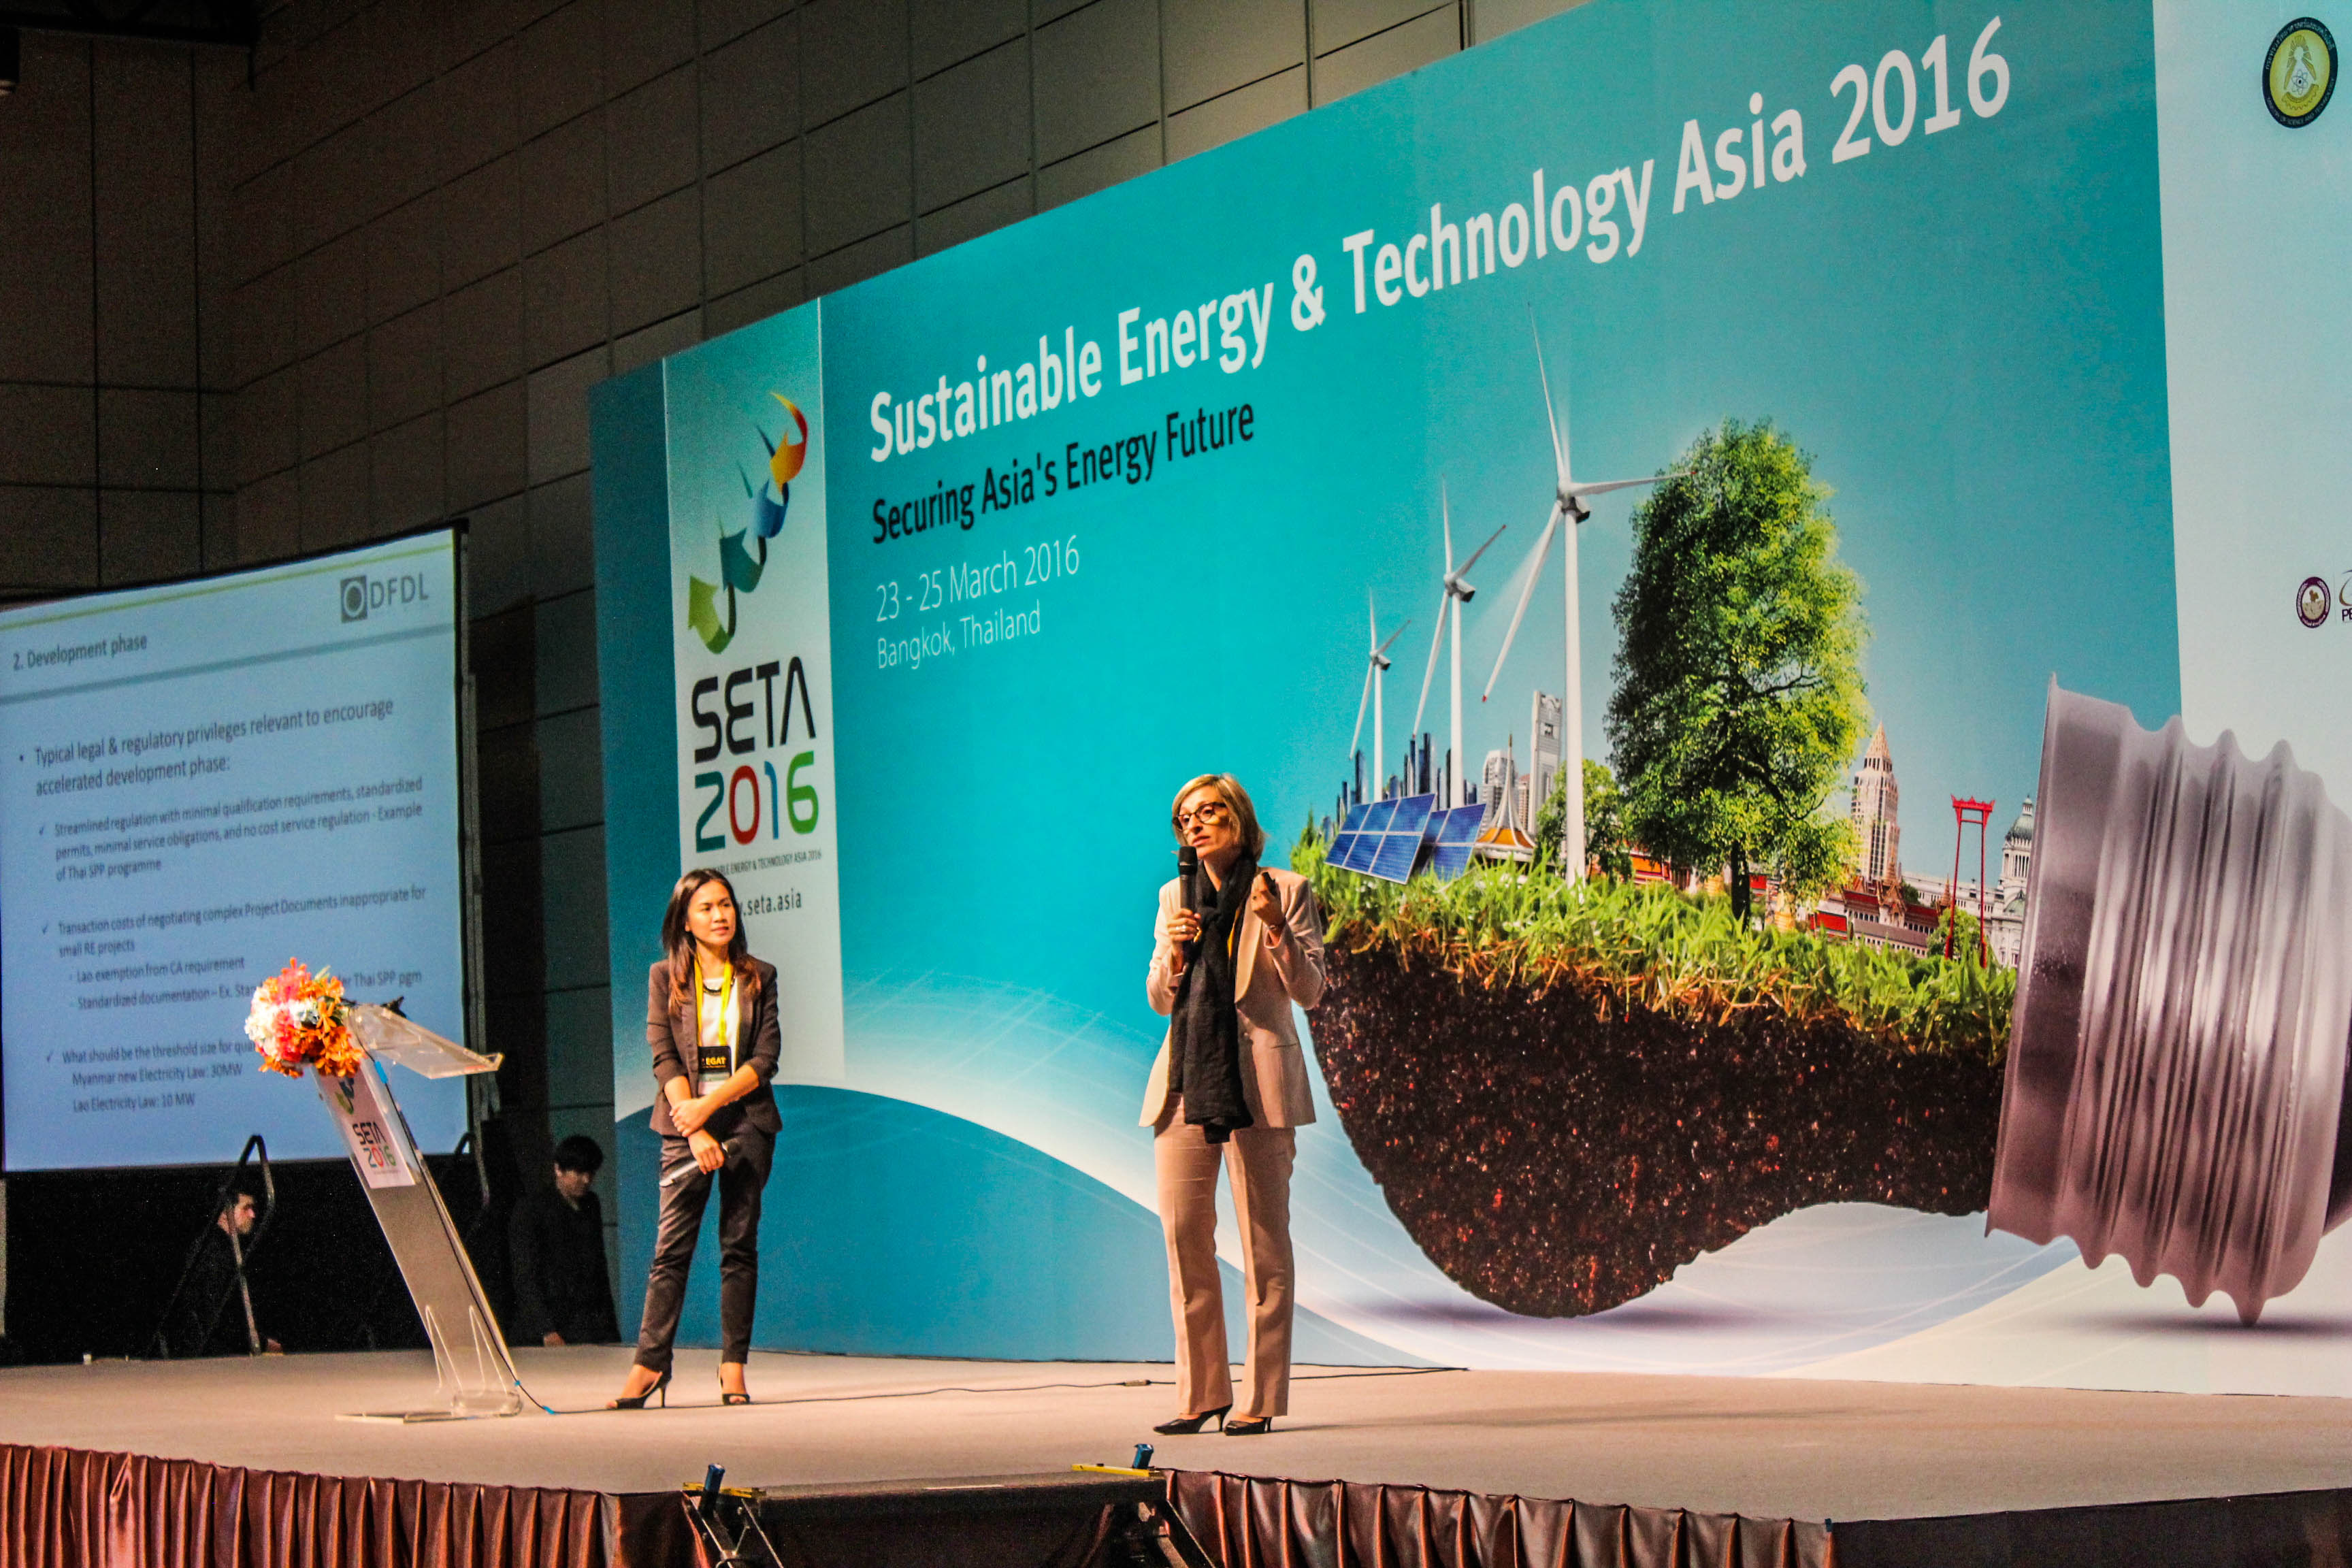 Audray_Souche_at_the_2016_Sustainable_Energy_and_Technology_Asia_Conference